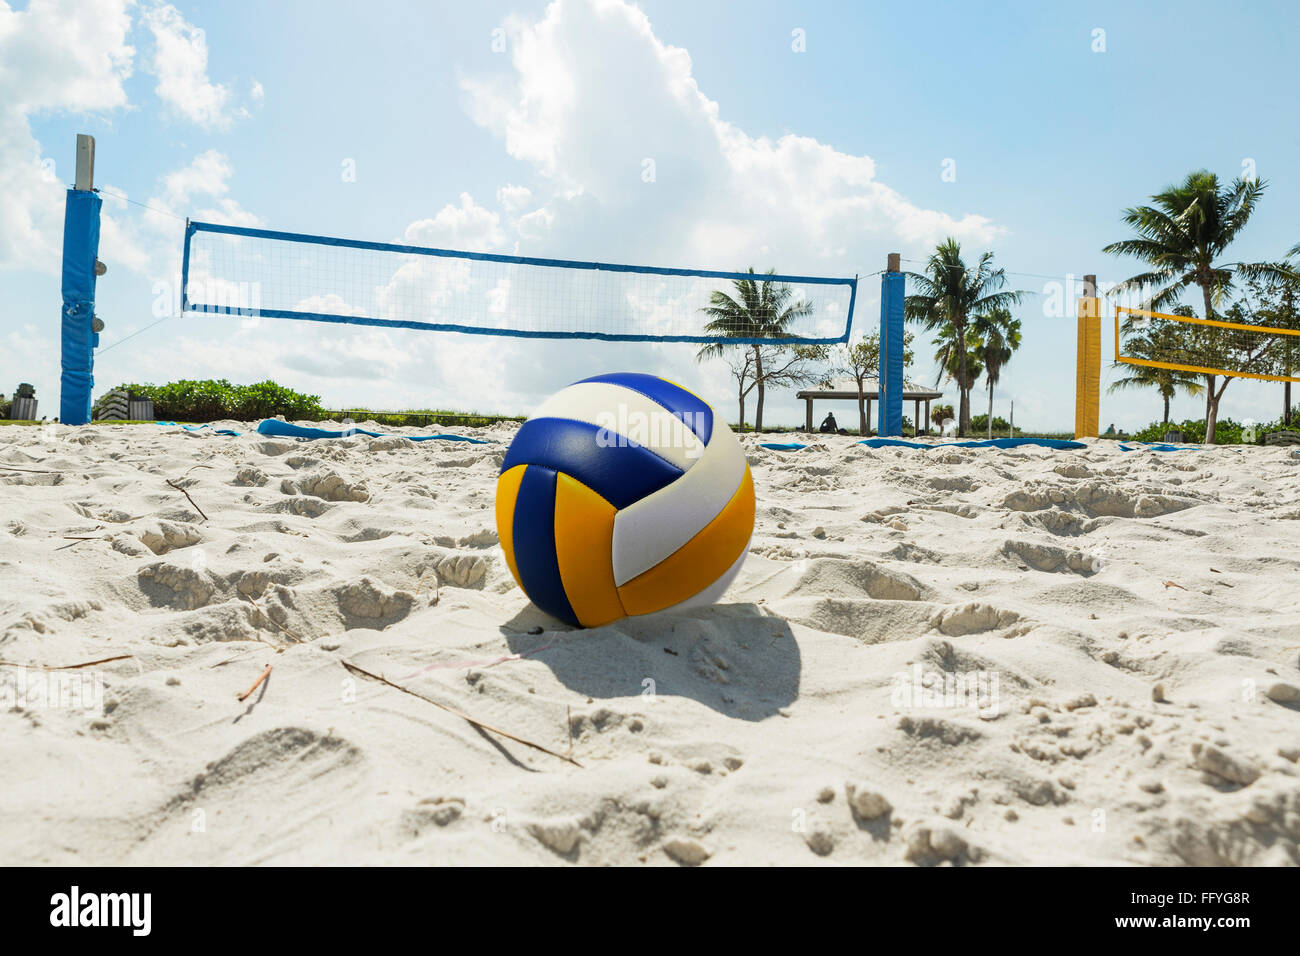 Volley ball in the foreground on the sand beach in the background  volleyball net and palm trees, sunny day at the beach. Florida Stock Photo  - Alamy